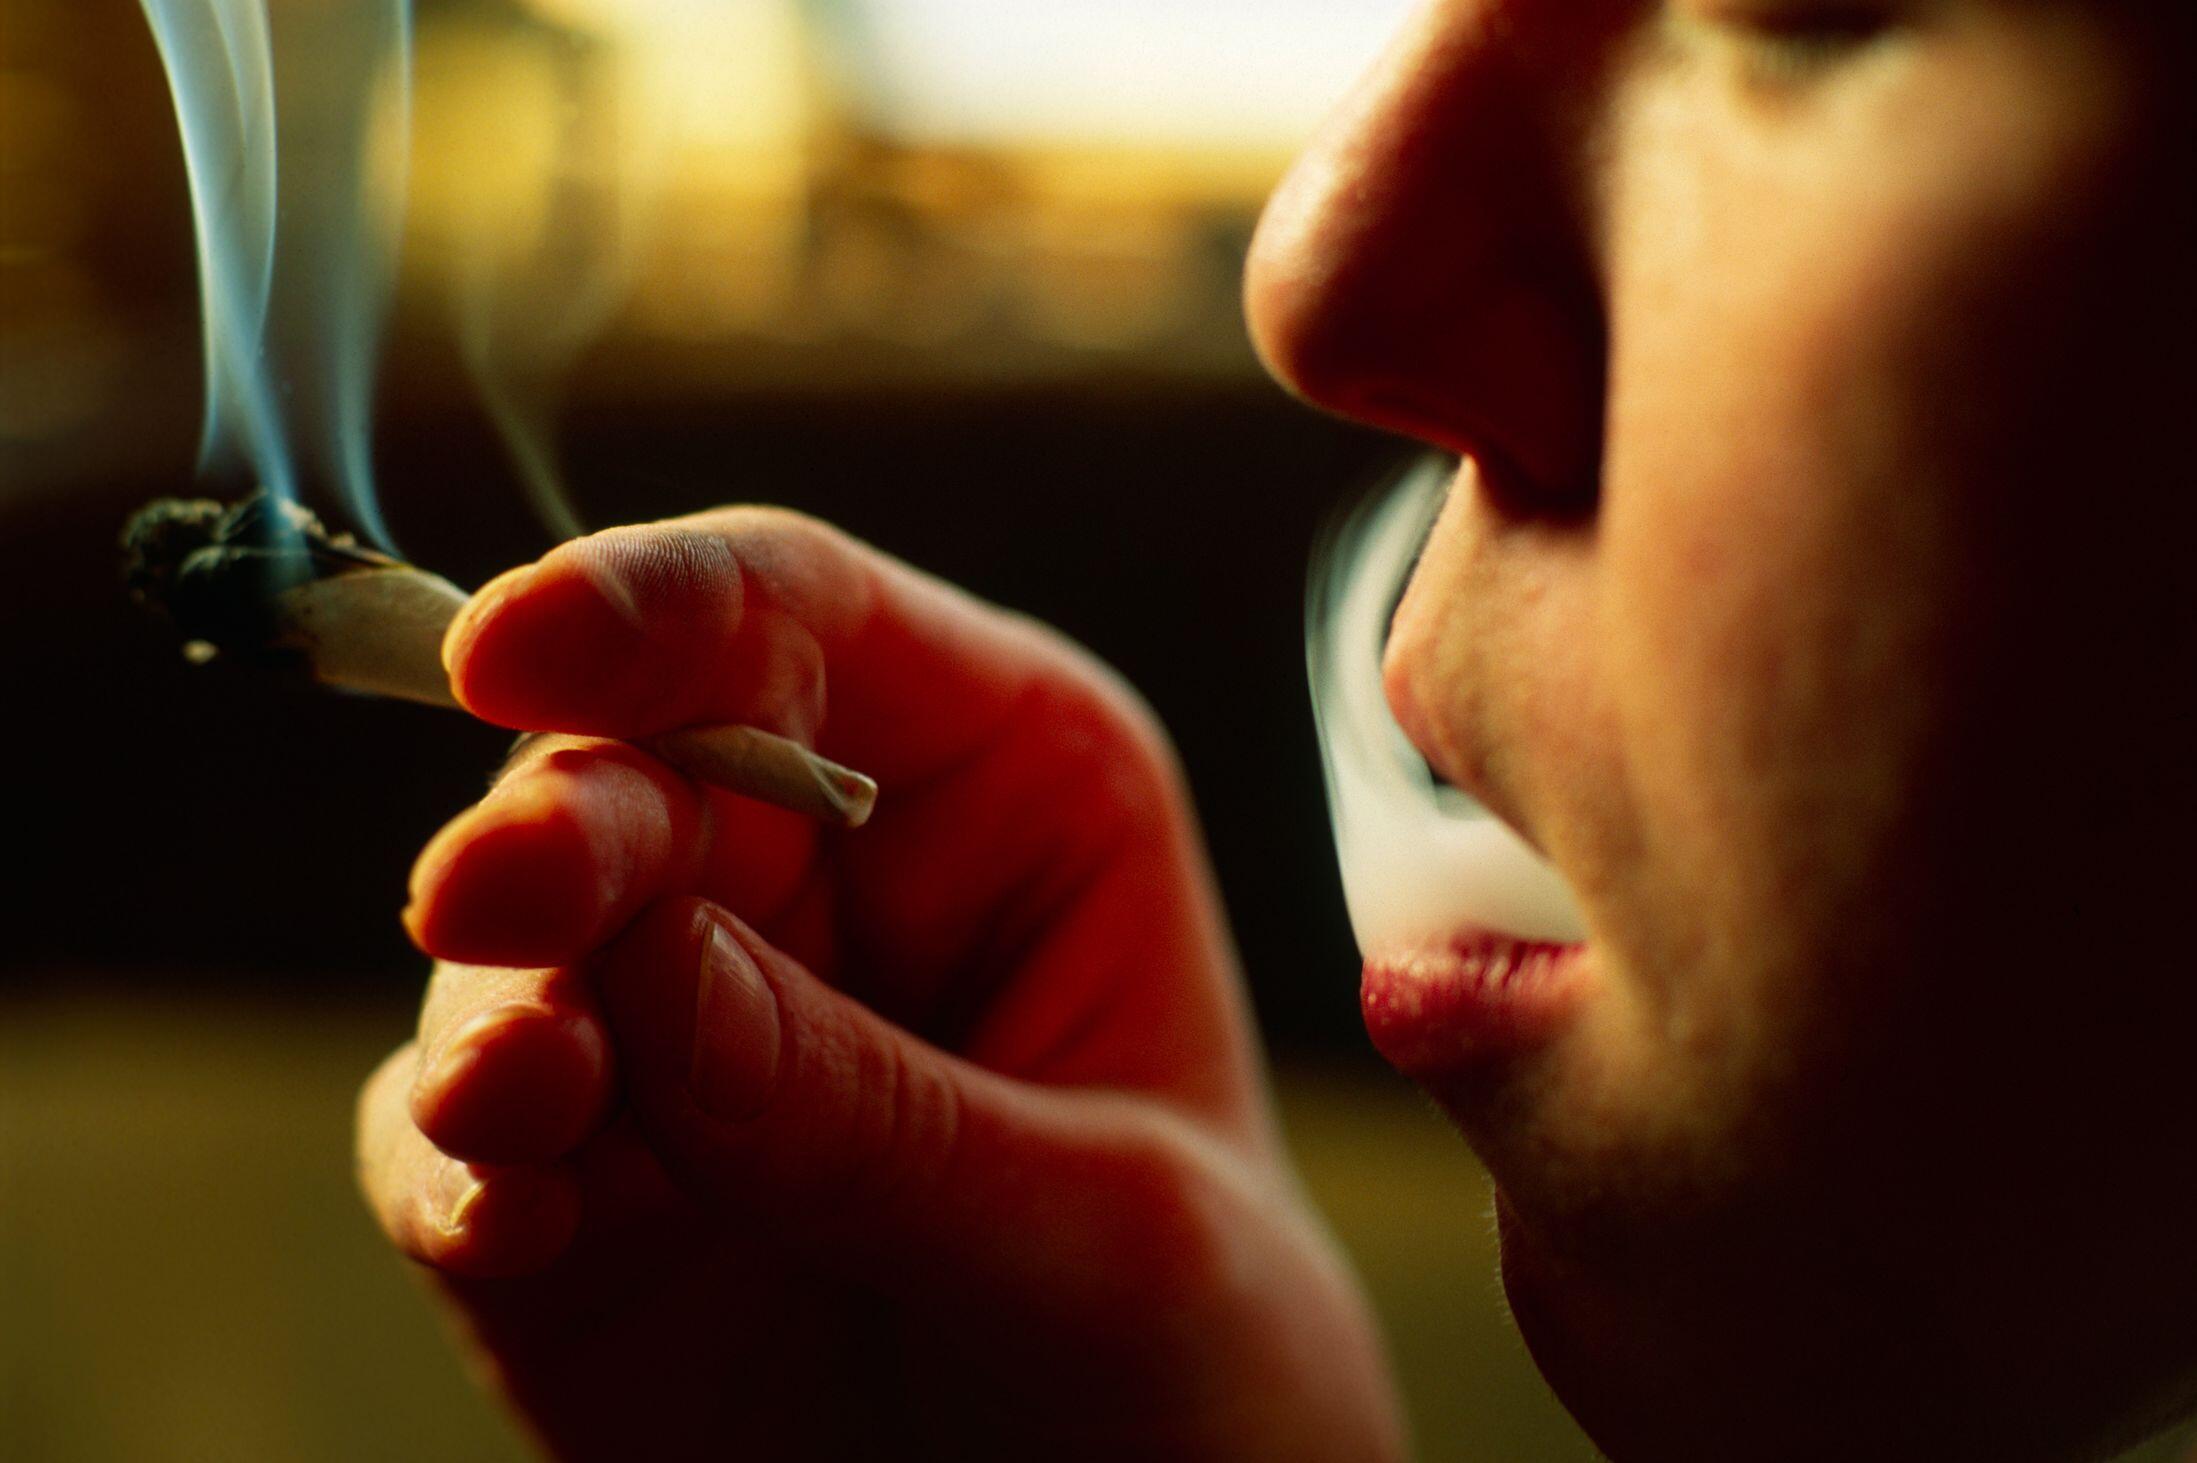 Study: No Link Between Marijuana Use and HIV-Related Mortality